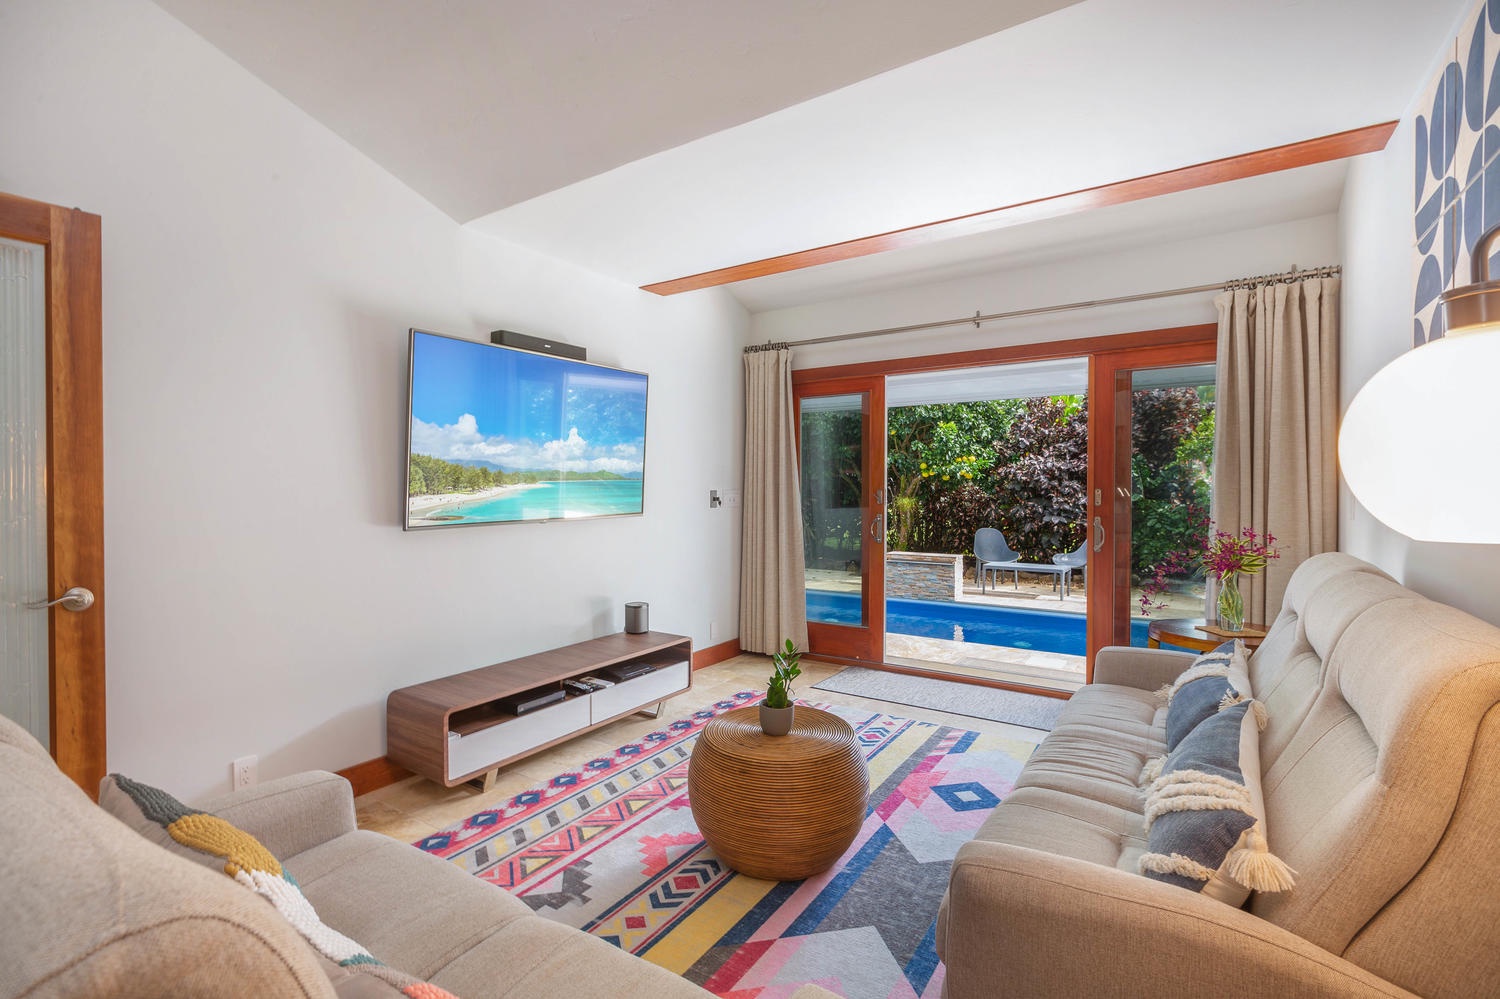 Princeville Vacation Rentals, Makana Lei - The bonus room also has another large television